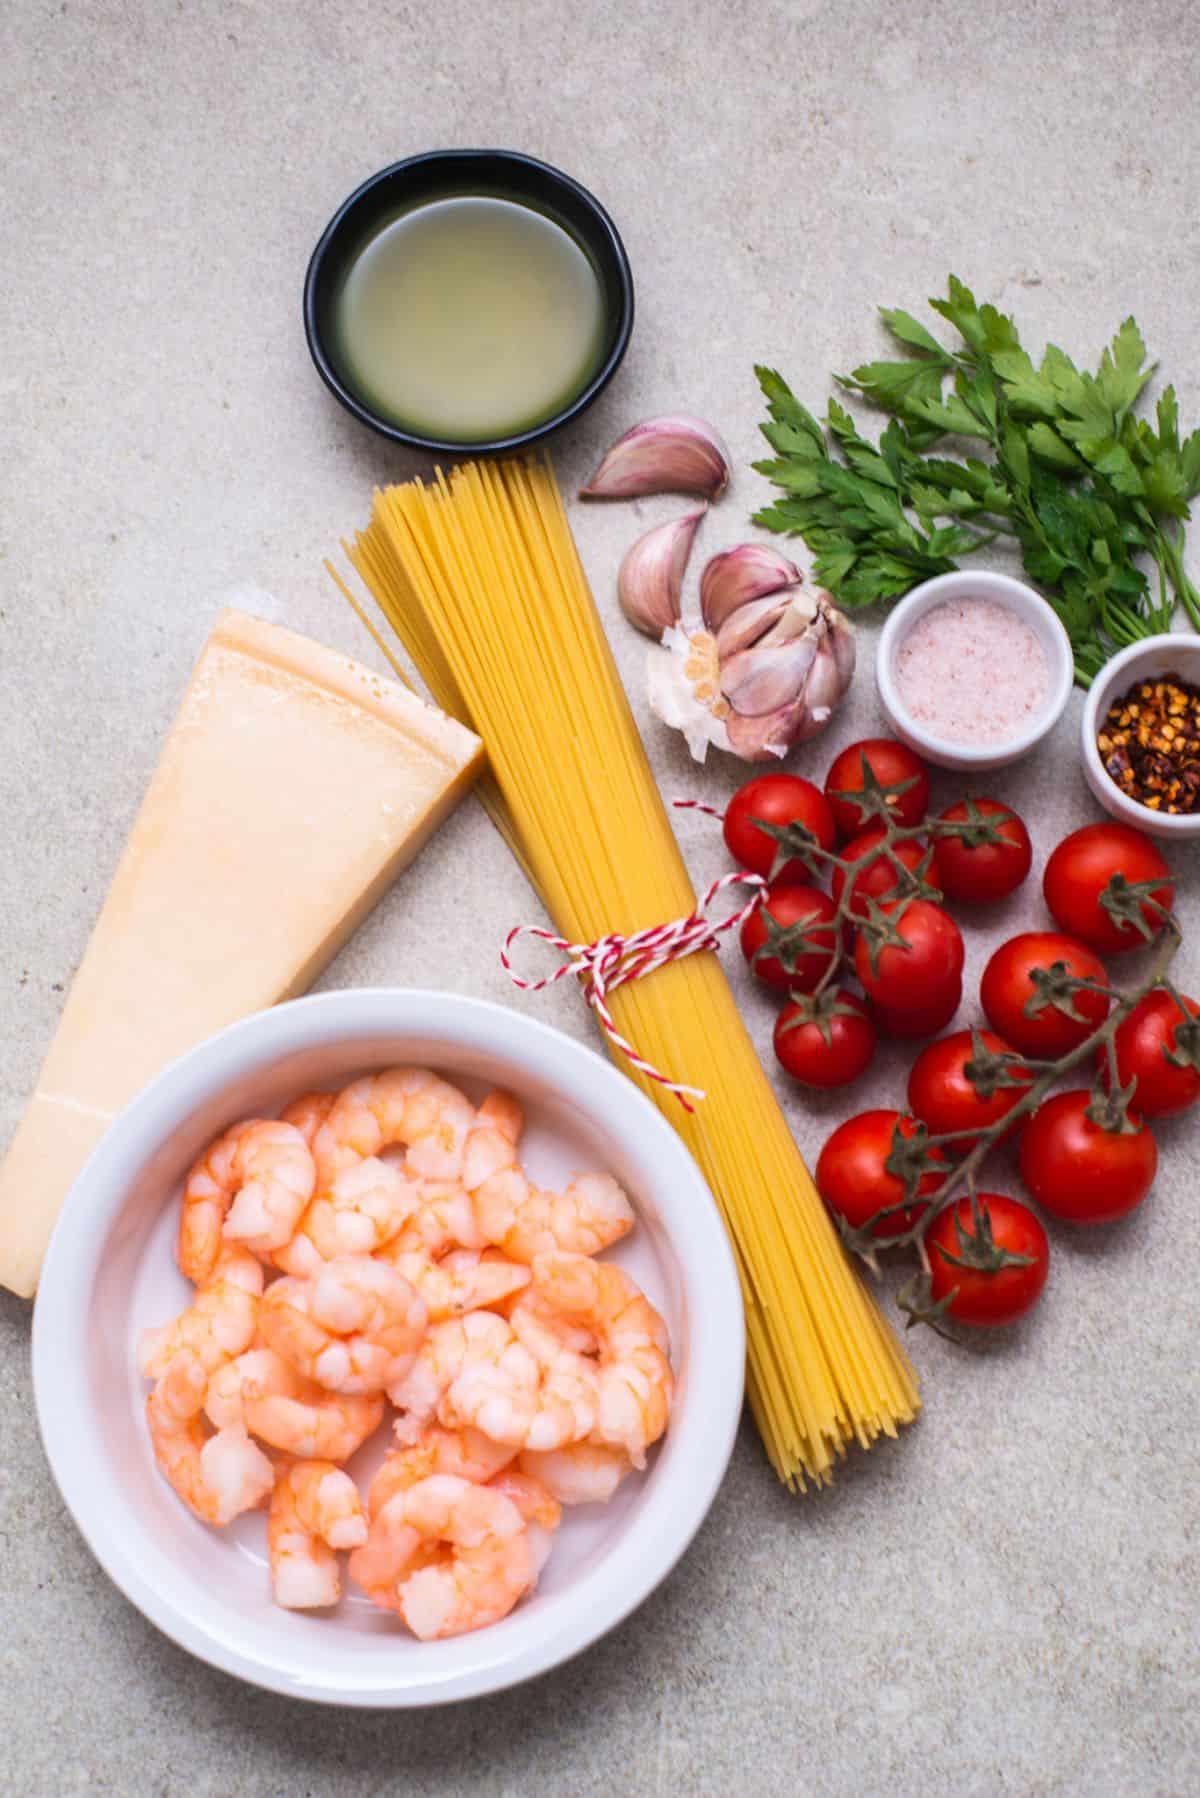 Angel hair pasta with prawns and cherry tomatoes ingredients